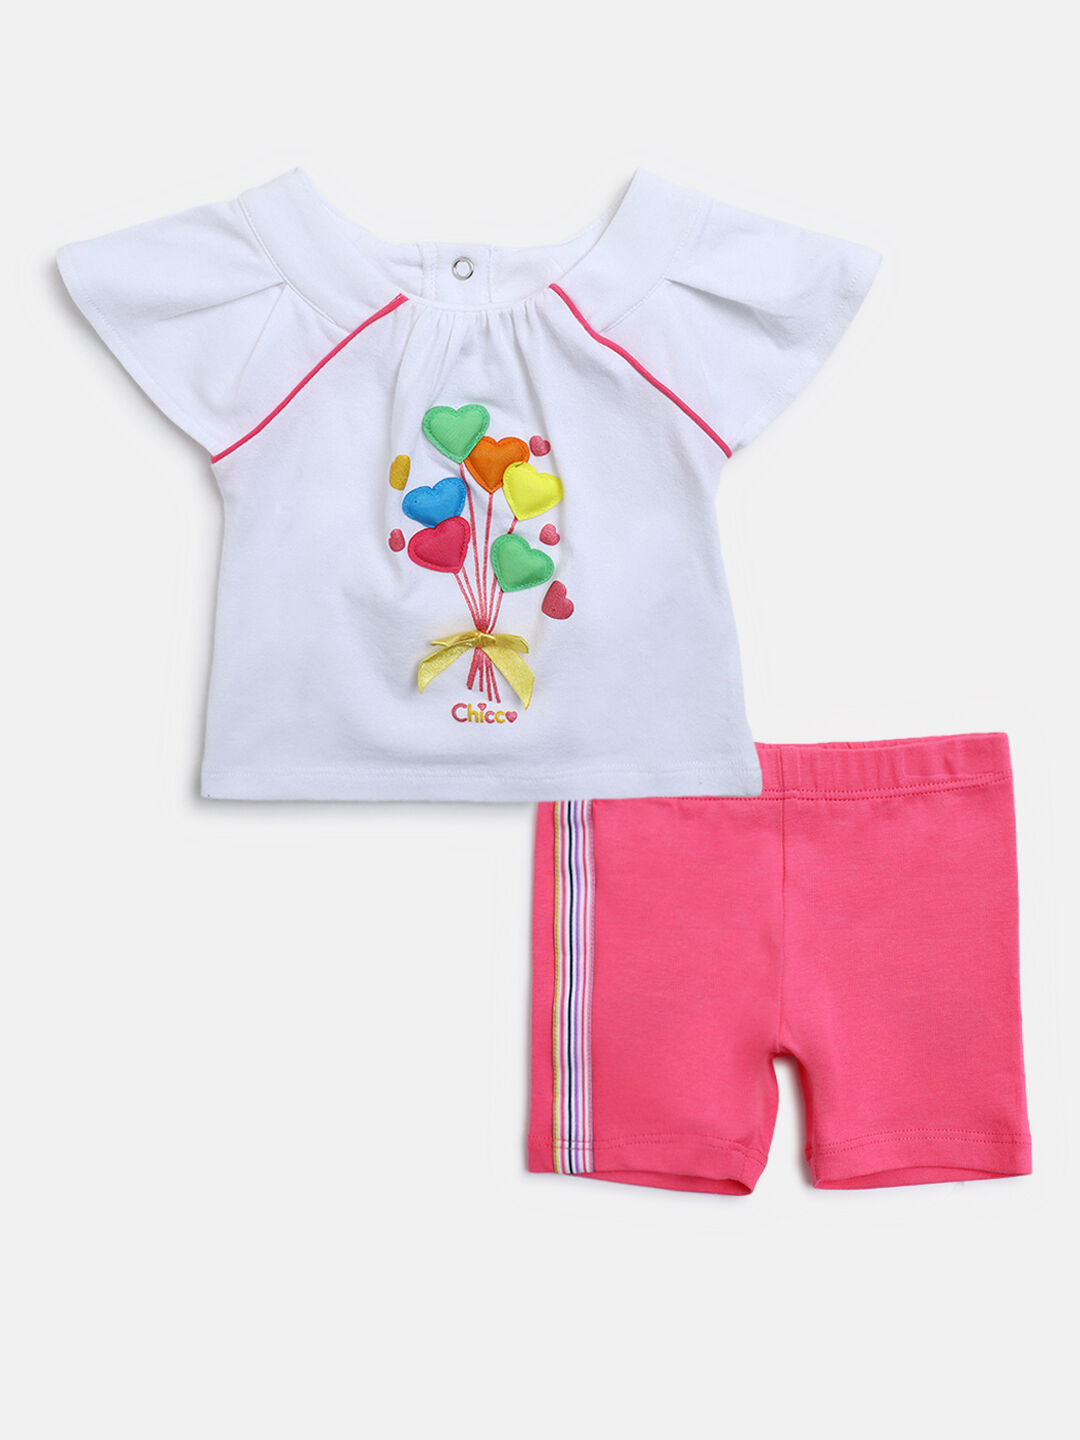 2pc Toddler Kids Baby Girls Outfit bowknot TopsWhite Pants Summer Clothes  Set  eBay